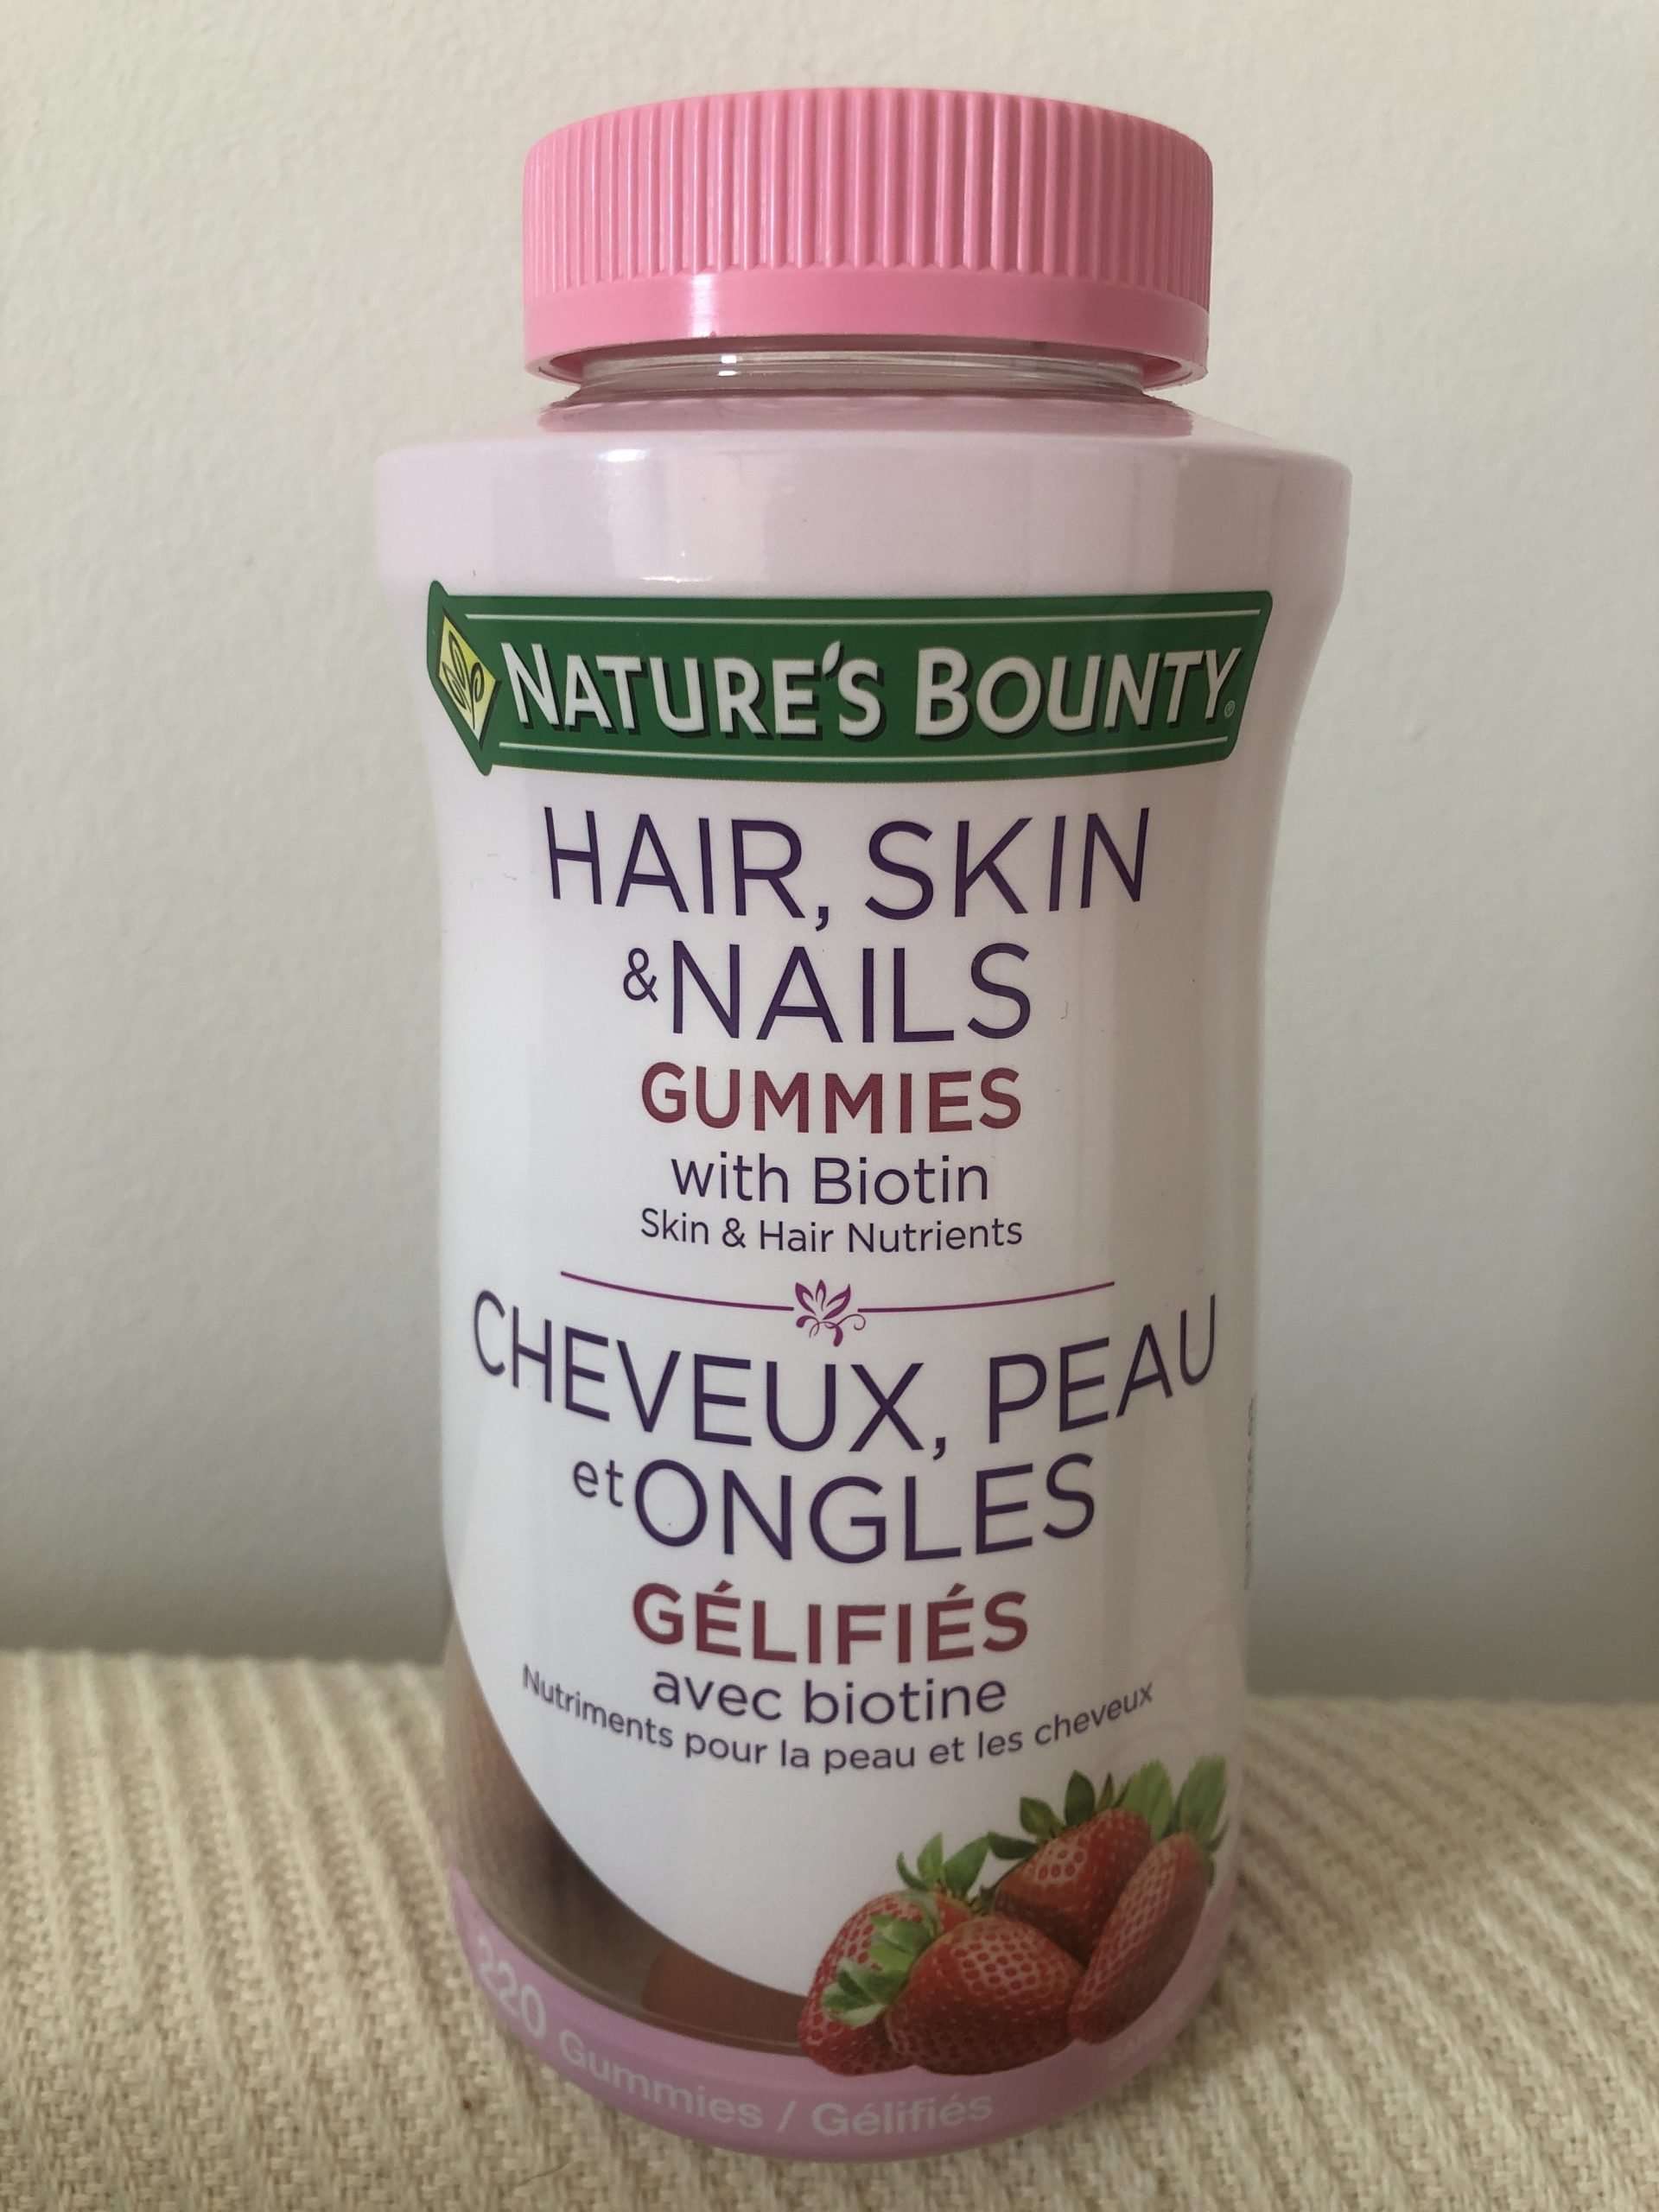 Natures bounty hair, skin &  nails reviews in Supplements ...